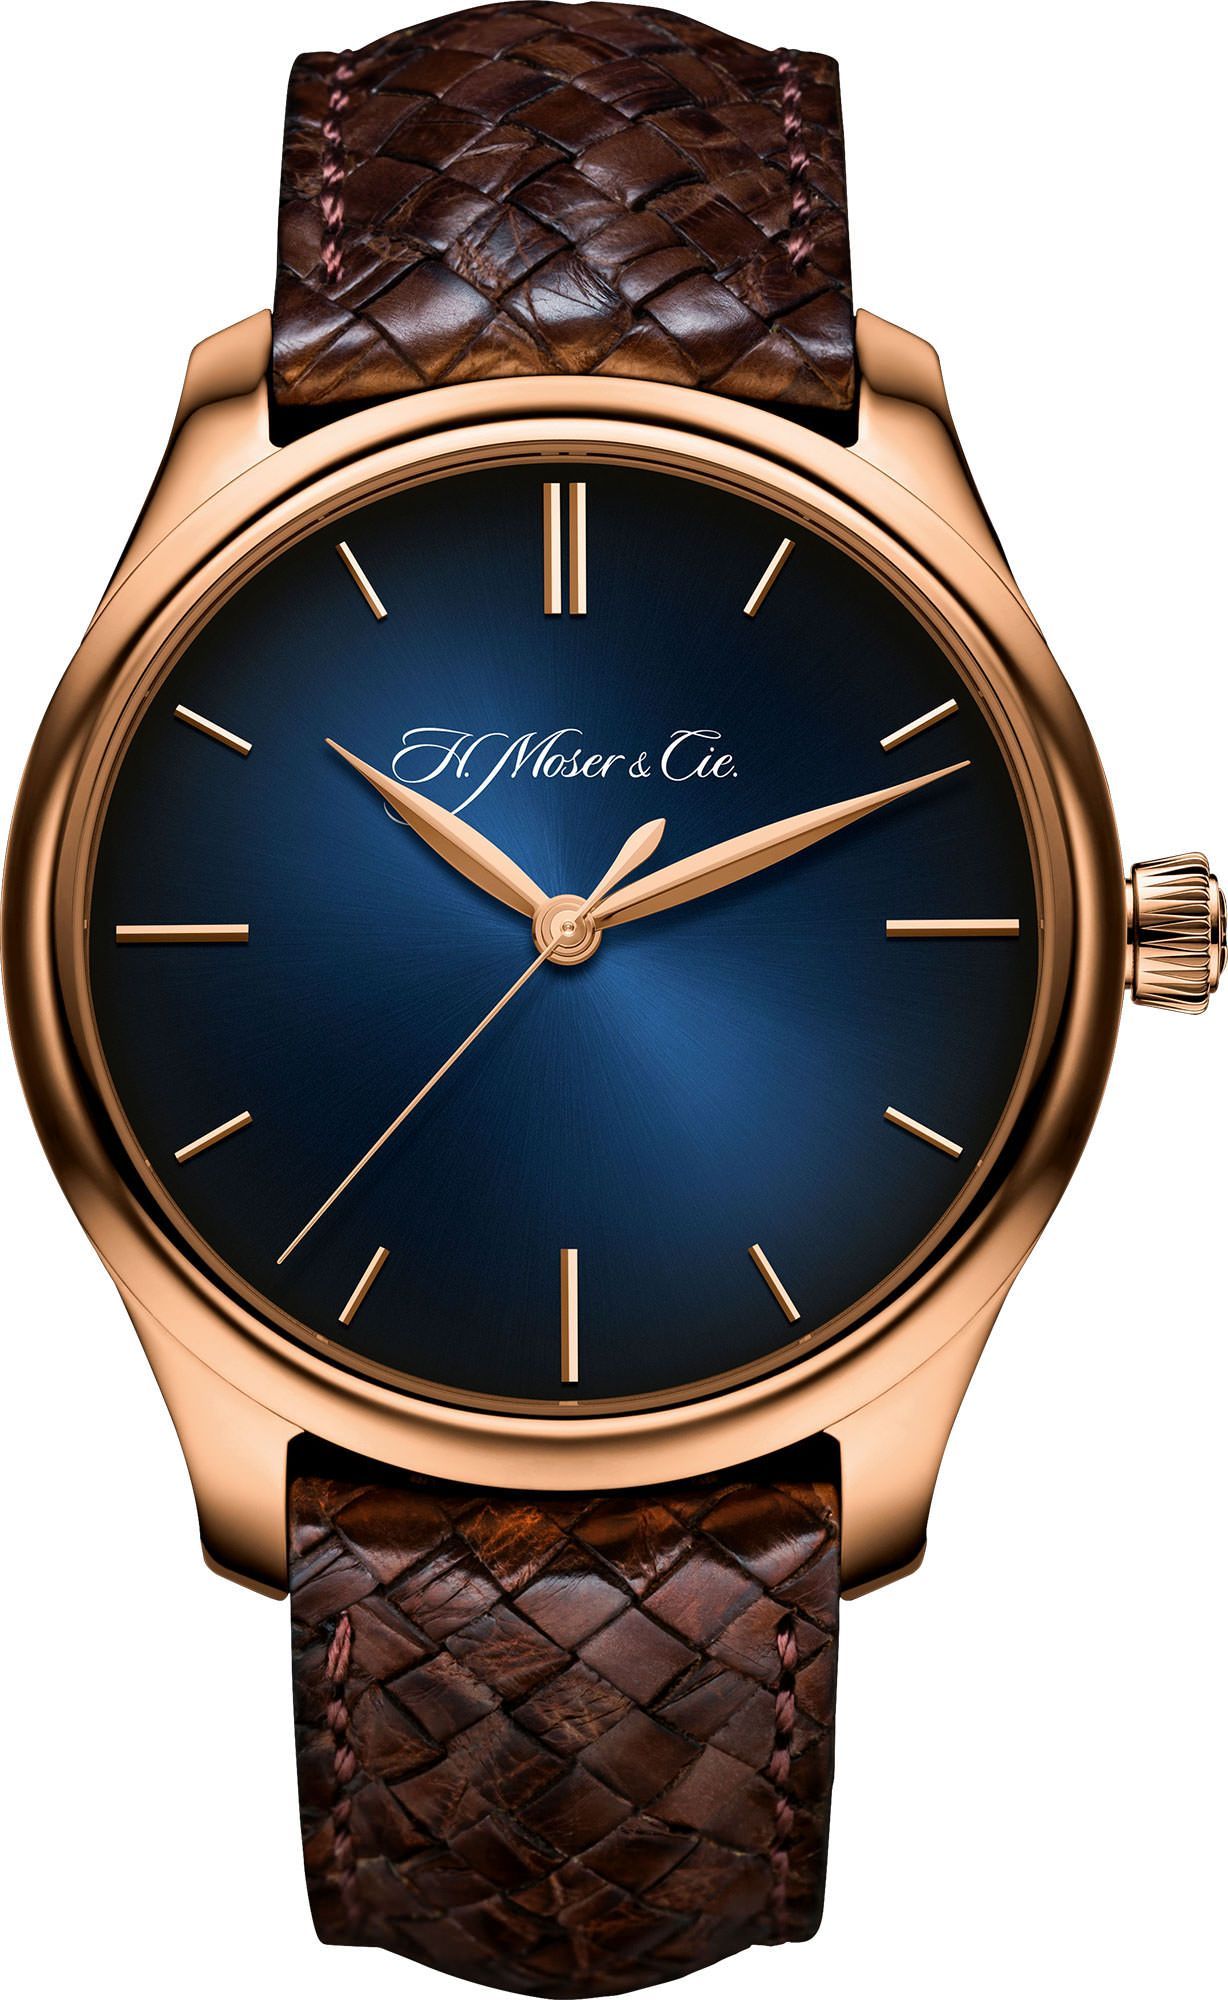 H. Moser & Cie. Centre Seconds Automatic 40 mm Watch in Blue Dial